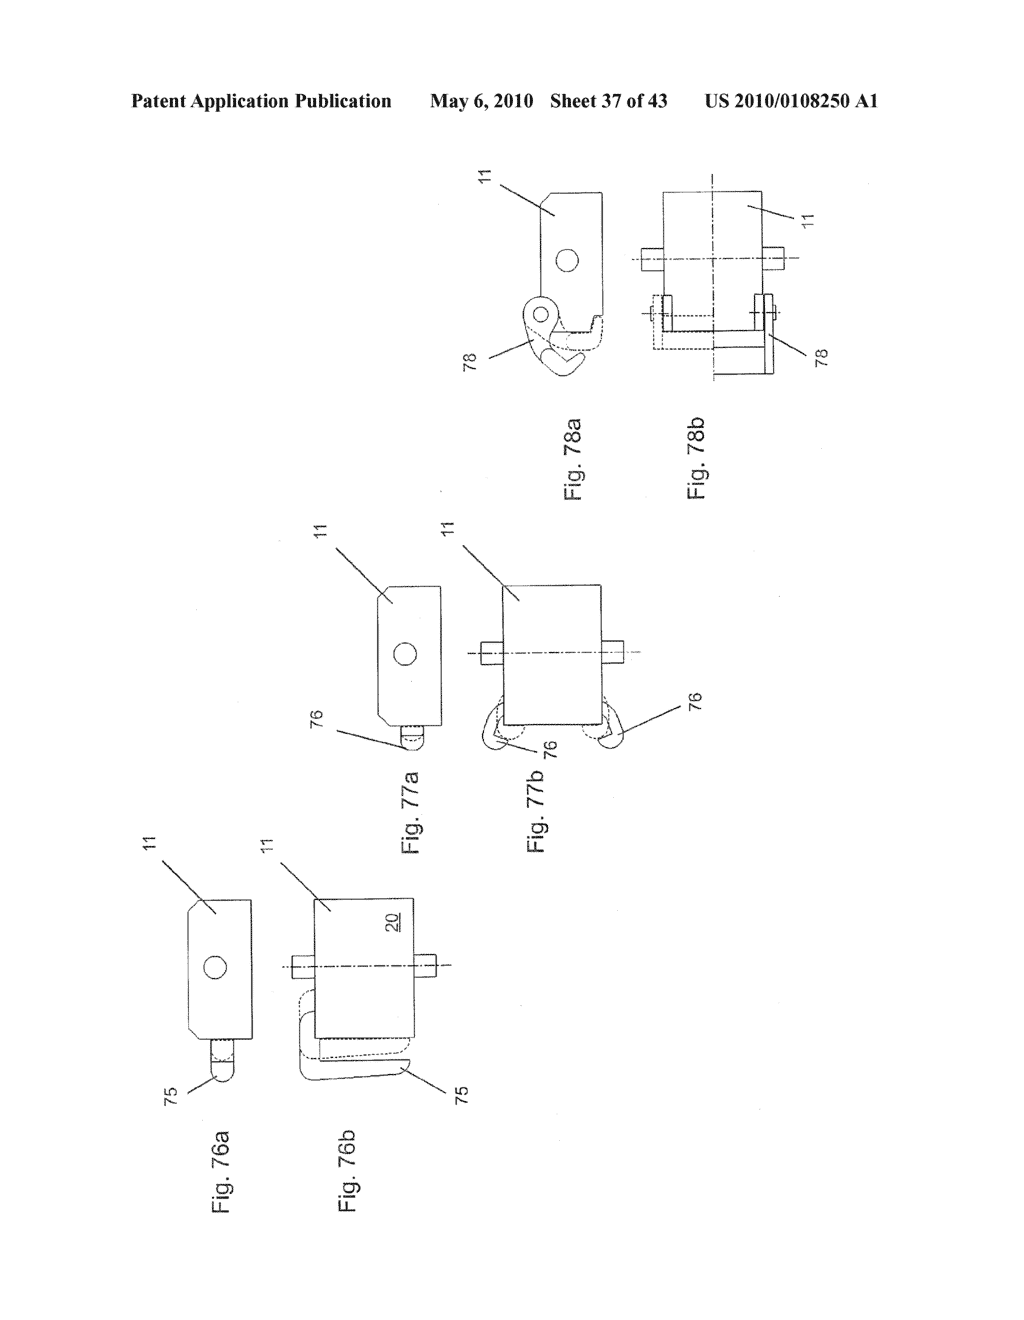 ADHESIVE TAPE STAMP AND METHOD FOR STAMPING AN ADHESIVE TAPE SECTION ONTO AN OBJECT - diagram, schematic, and image 38